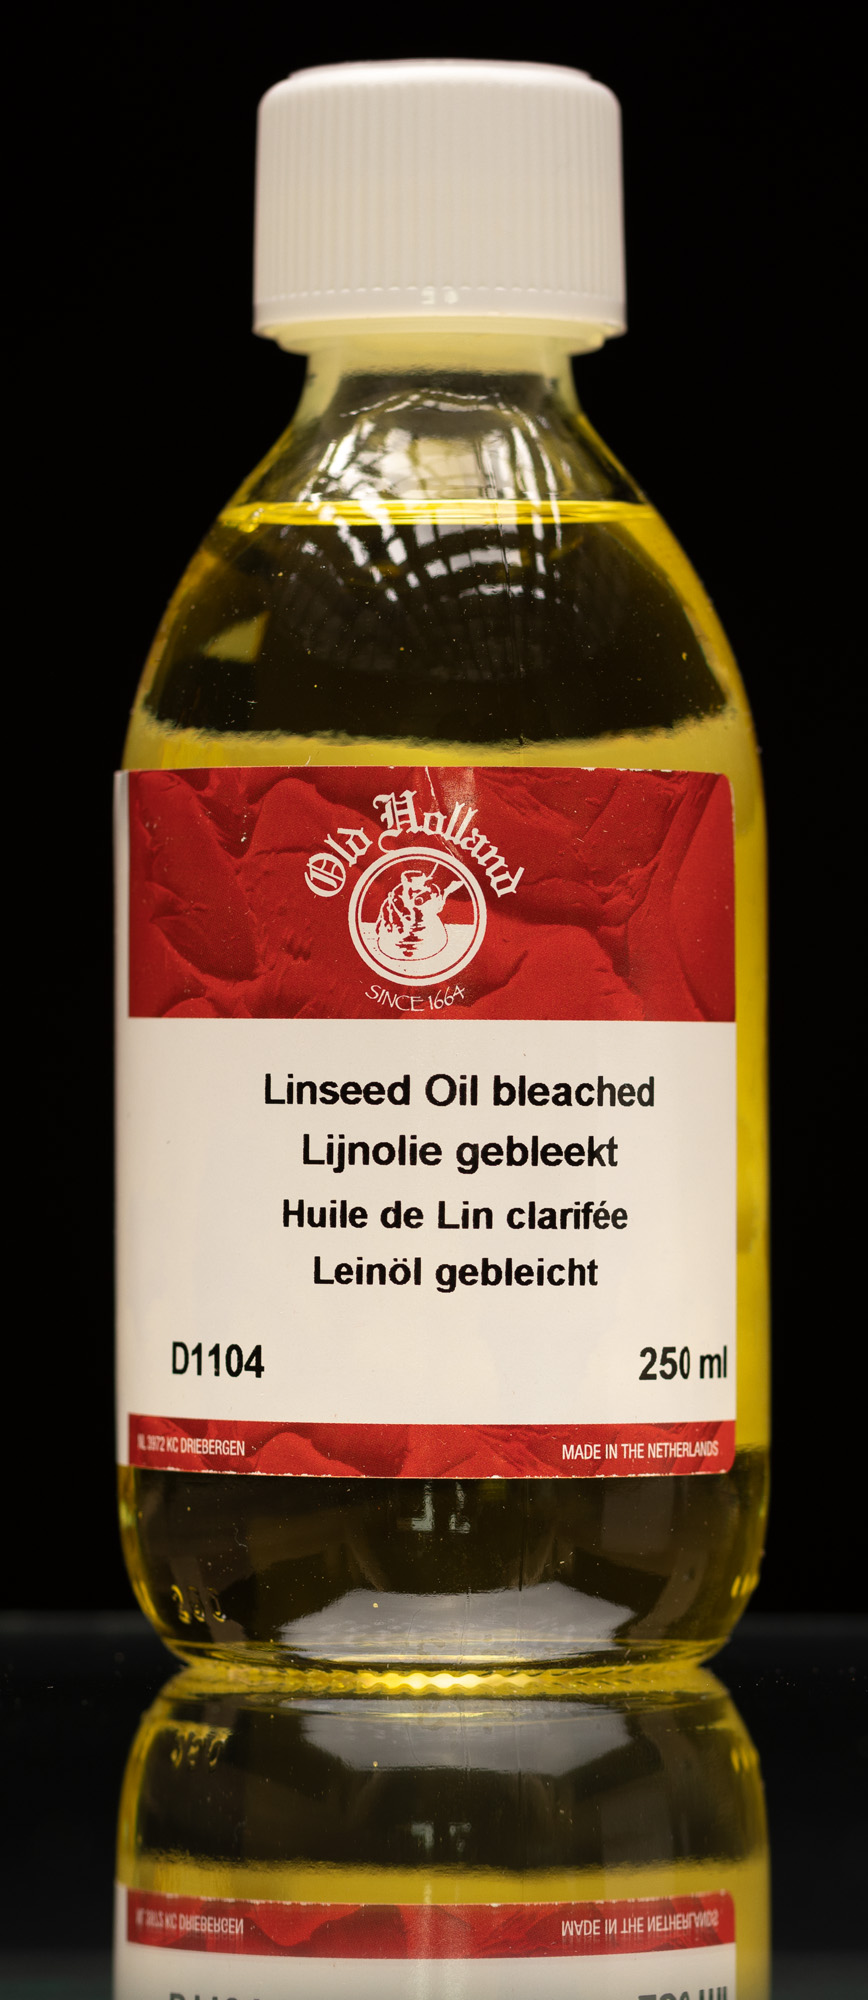 Old Holland Linseed Oil Bleached C1104